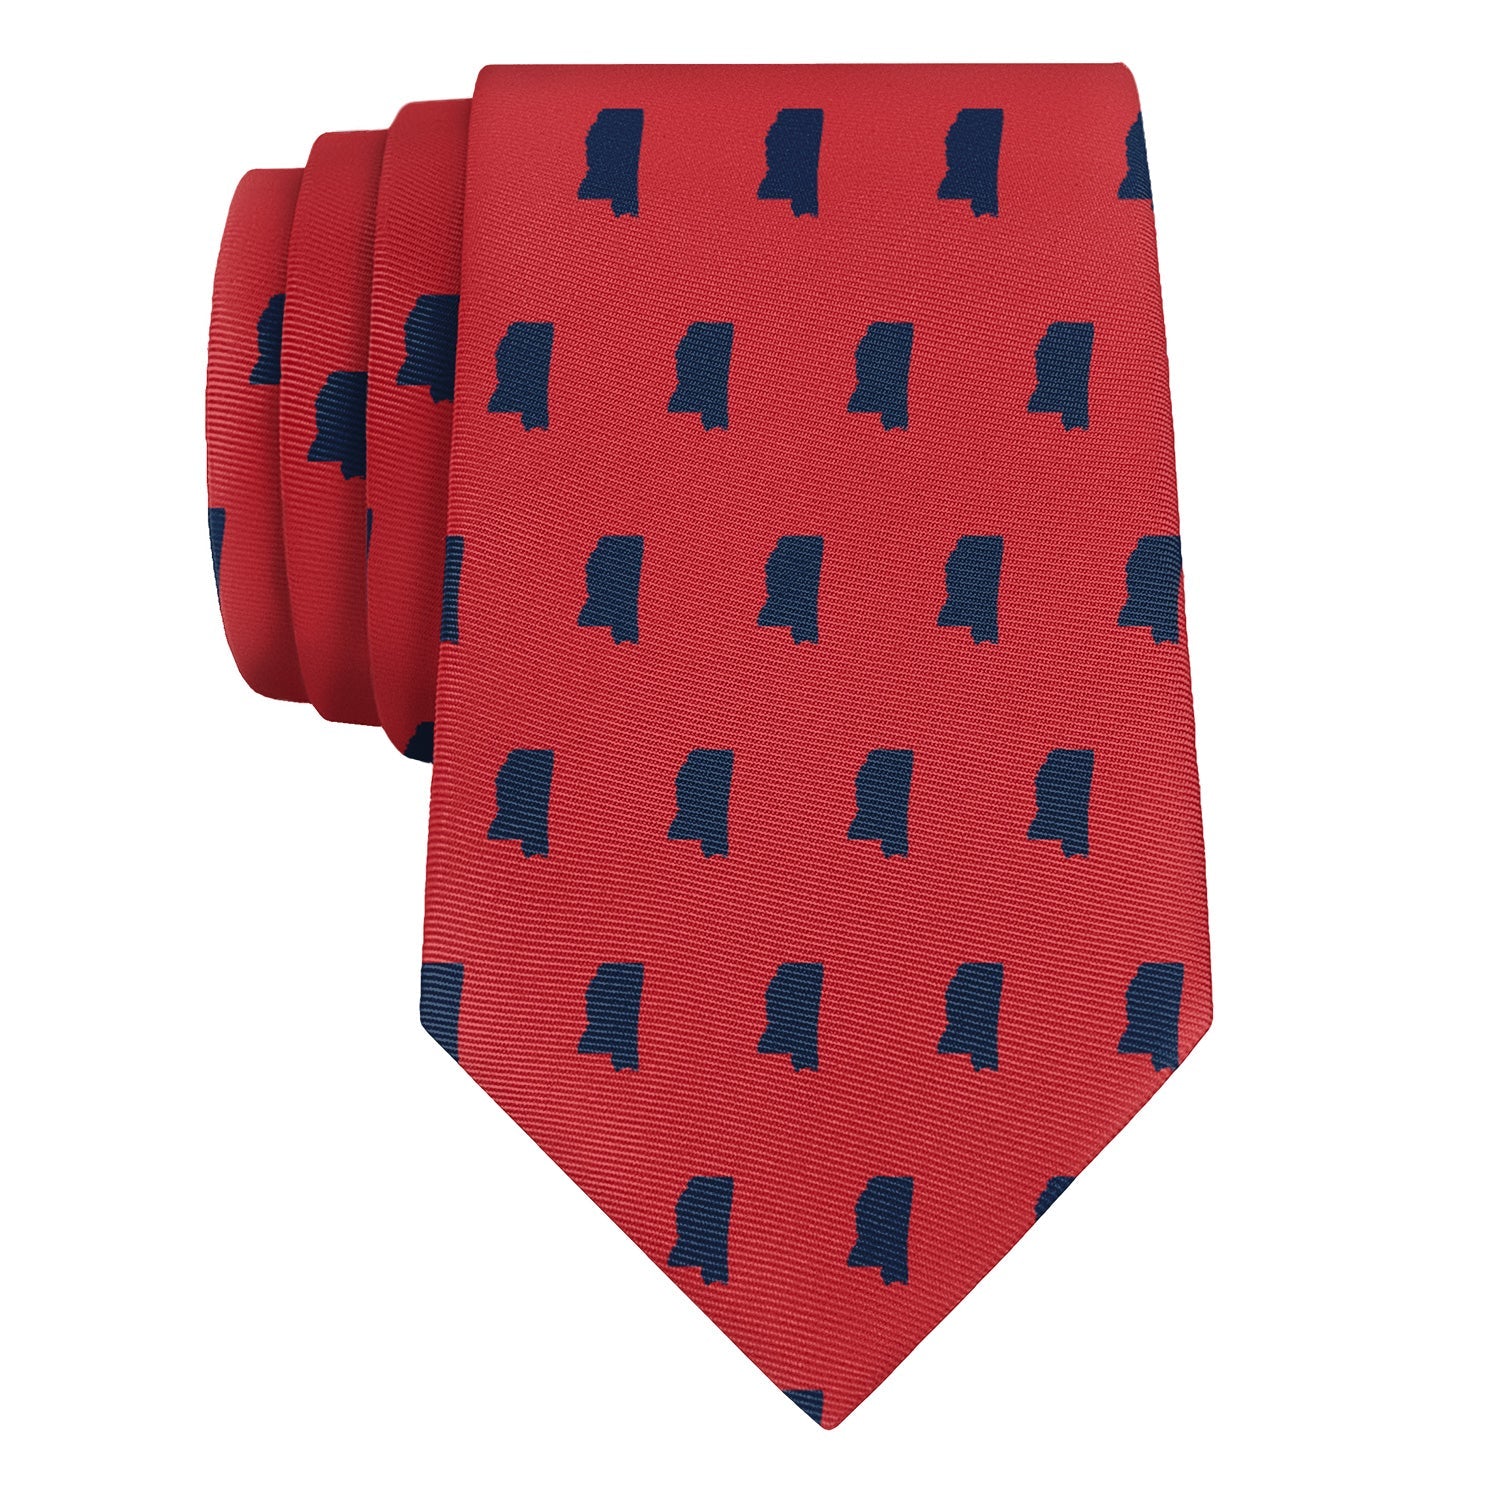 Mississippi State Outline Necktie - Rolled - Knotty Tie Co.